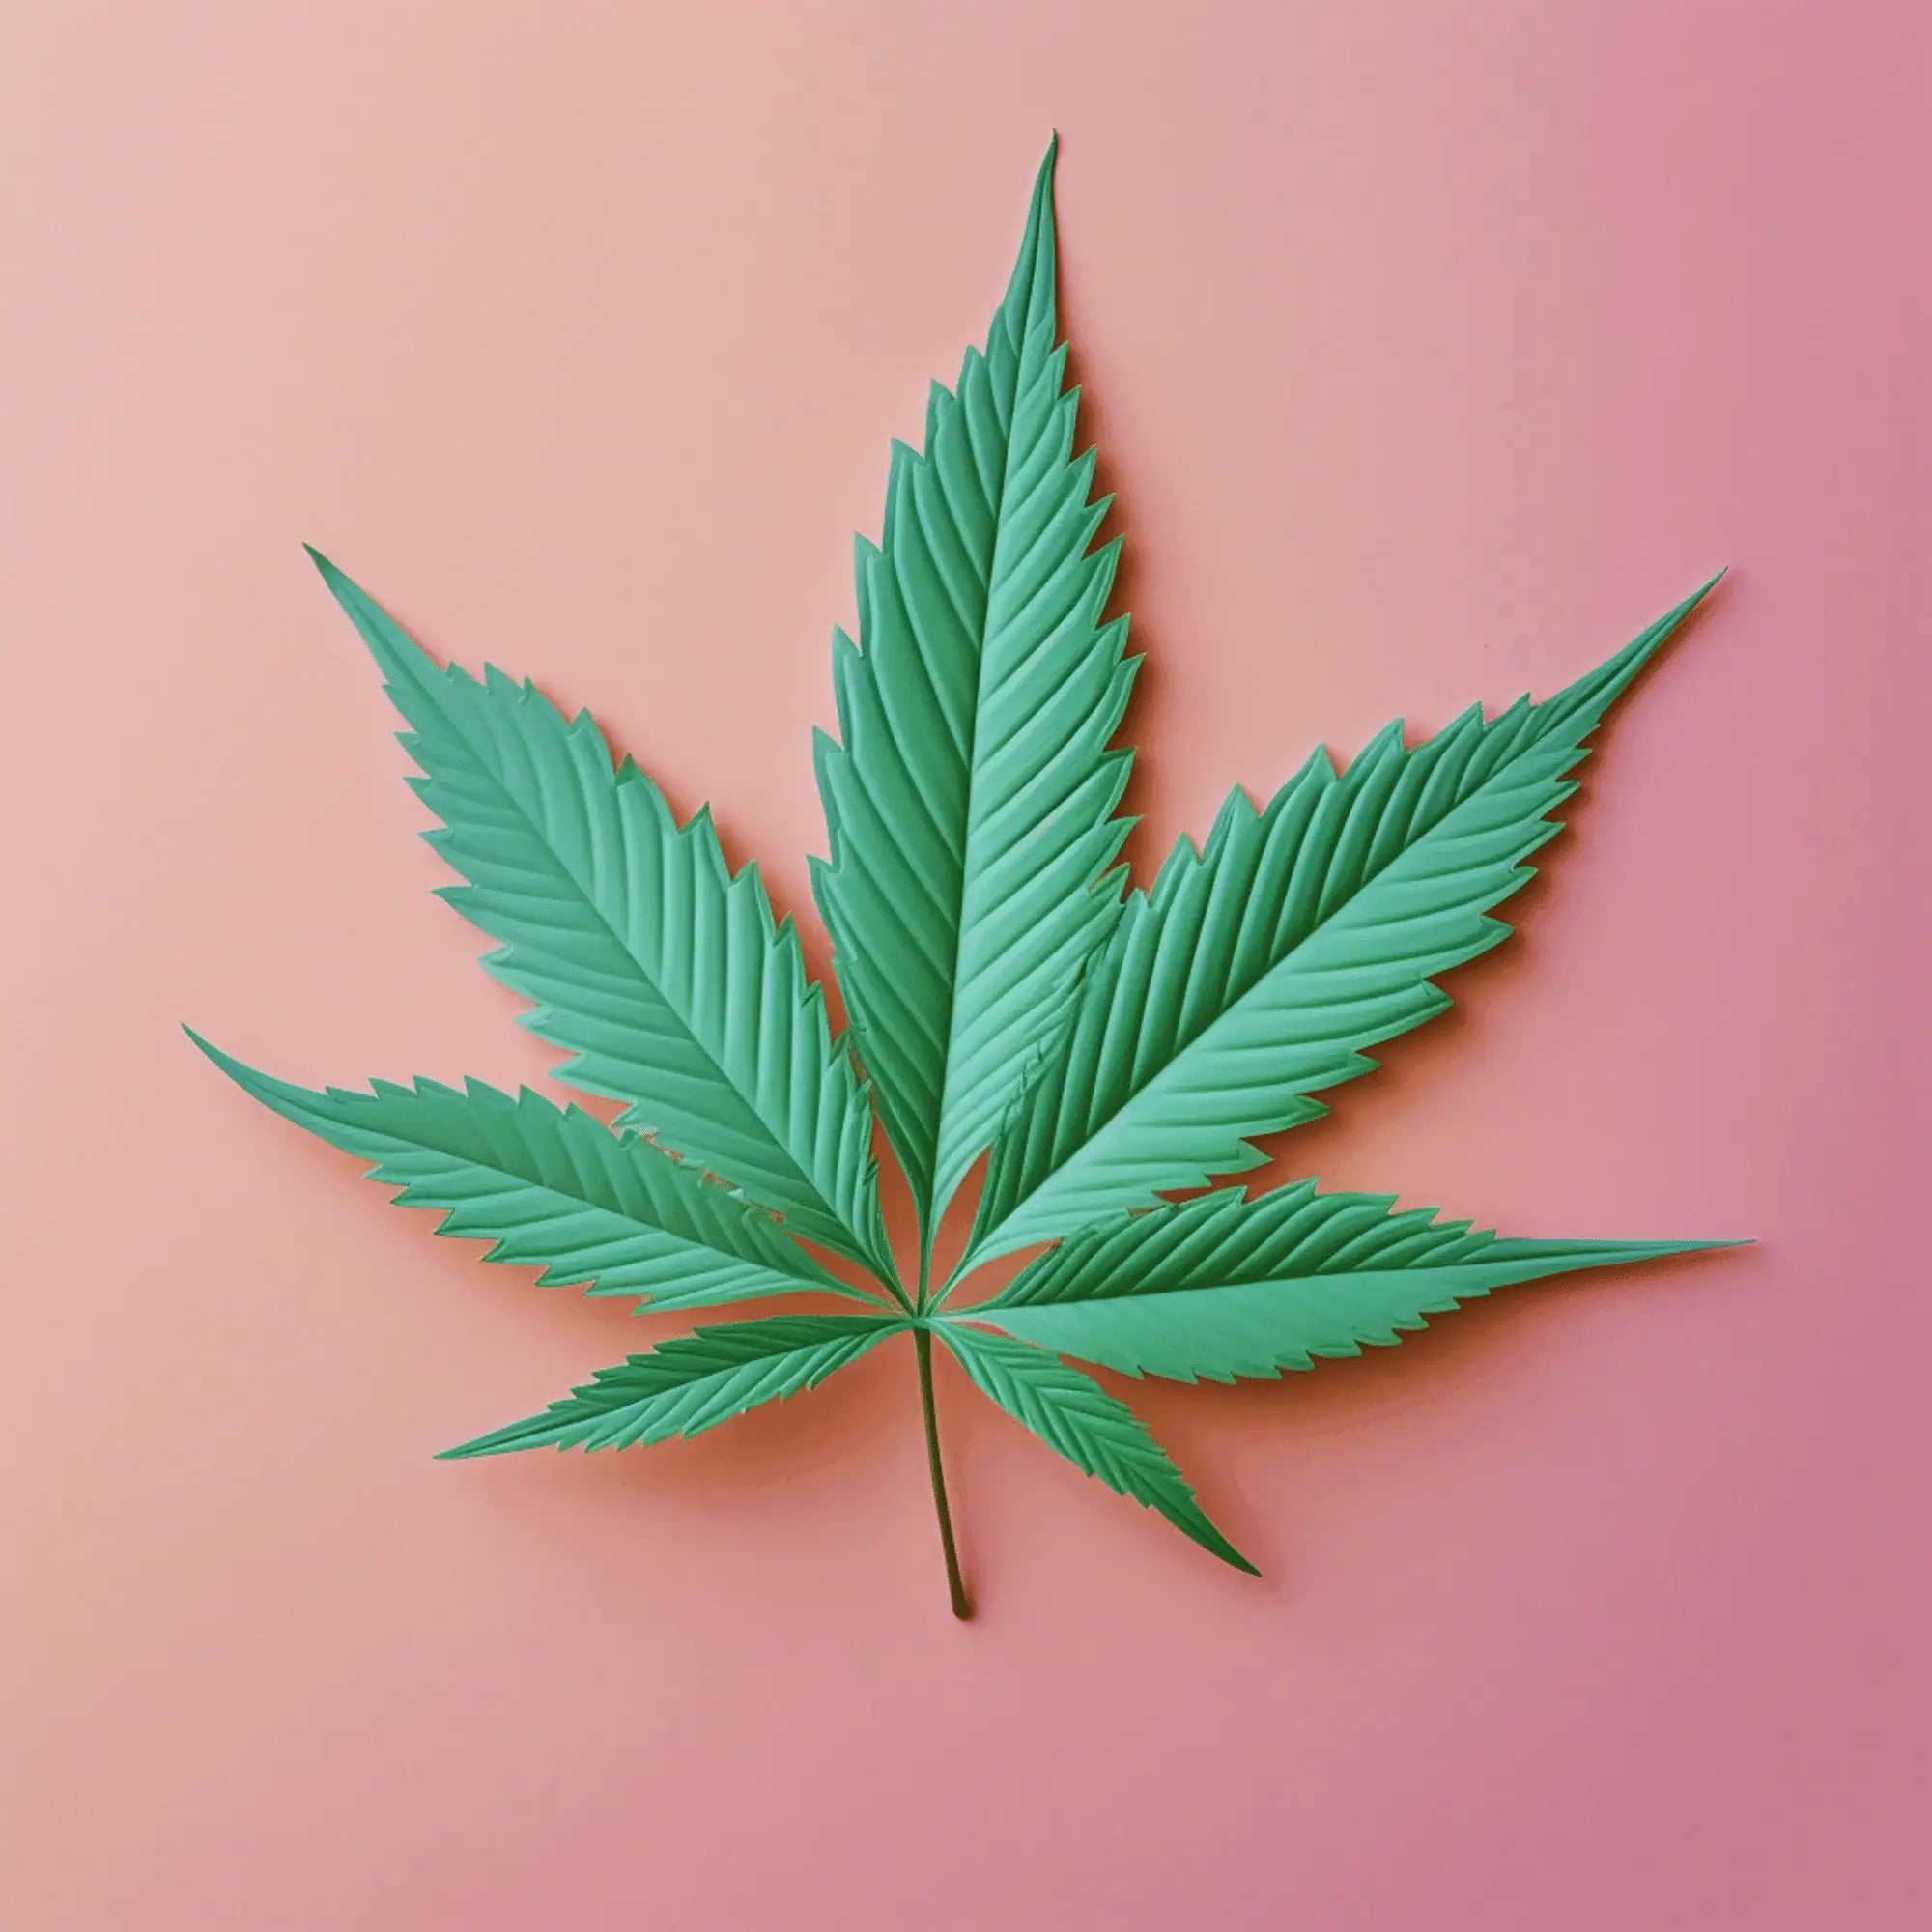 Weed Leaf Featured Image